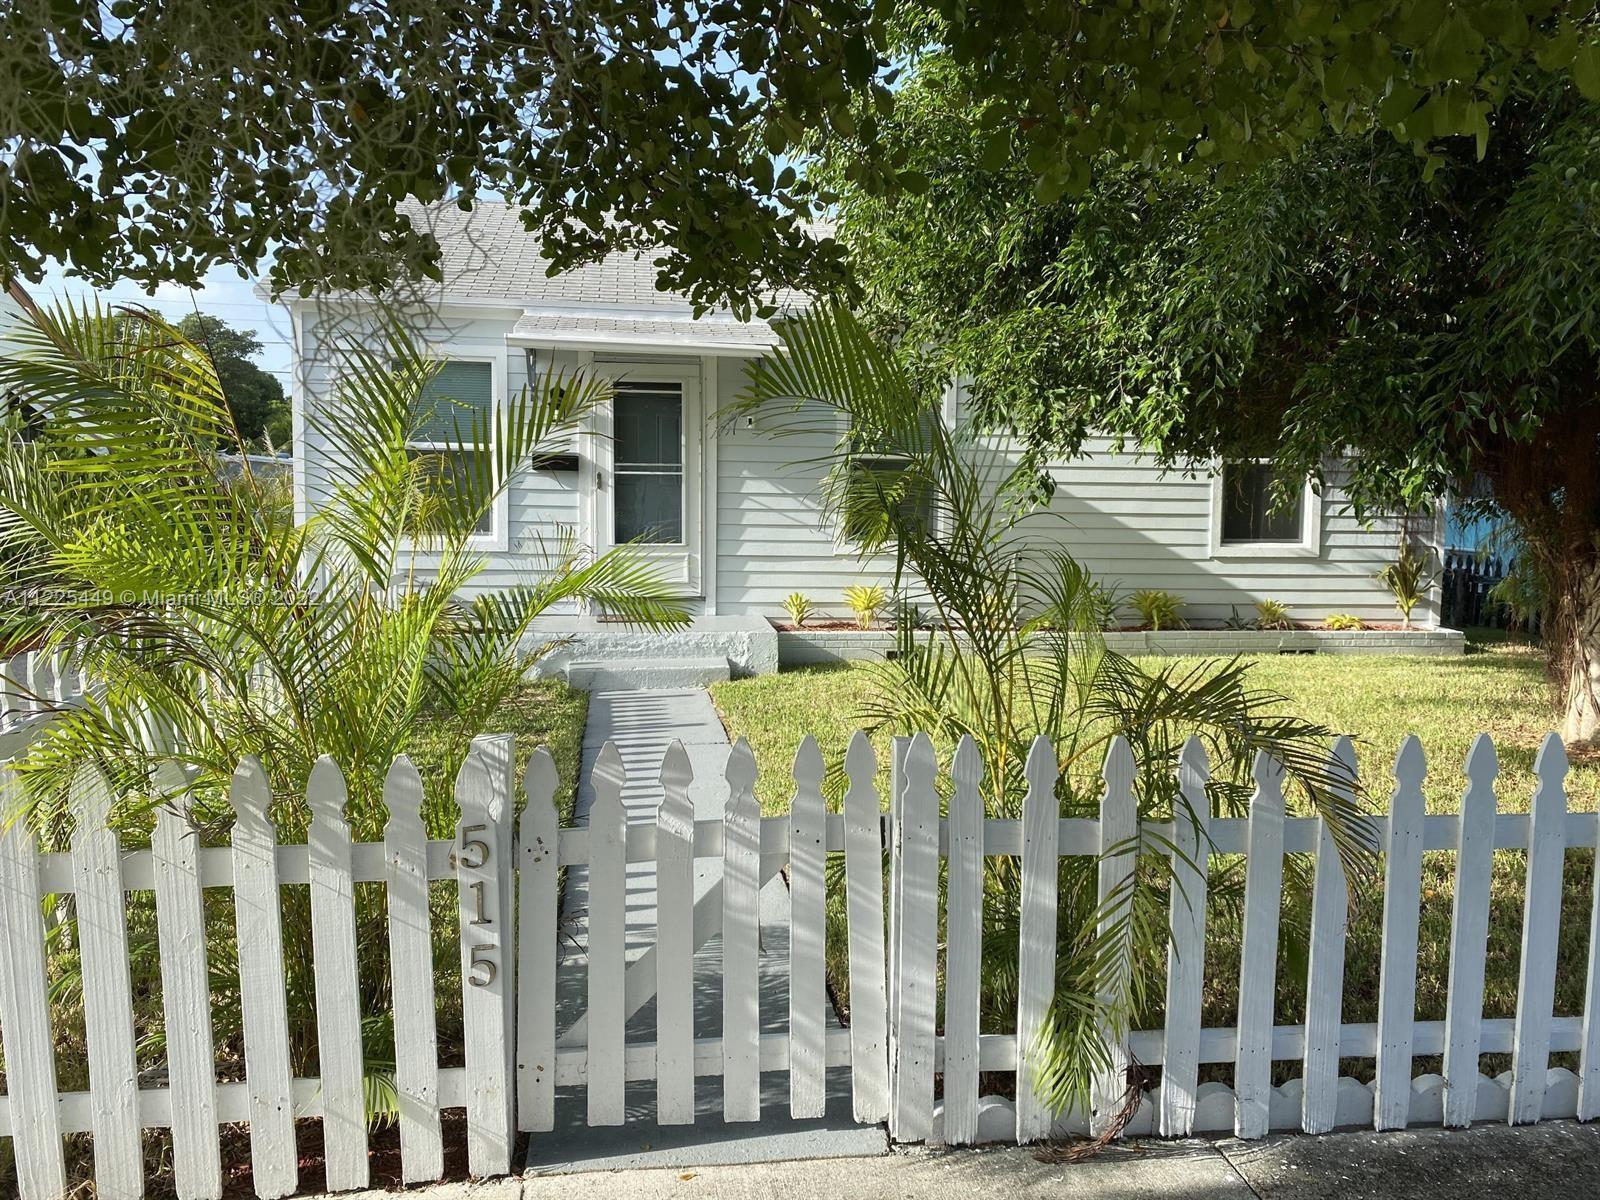 Completely remodeled 3 bedroom 1 bath single family KEY WEST style home in West Palm Beach, minutes 